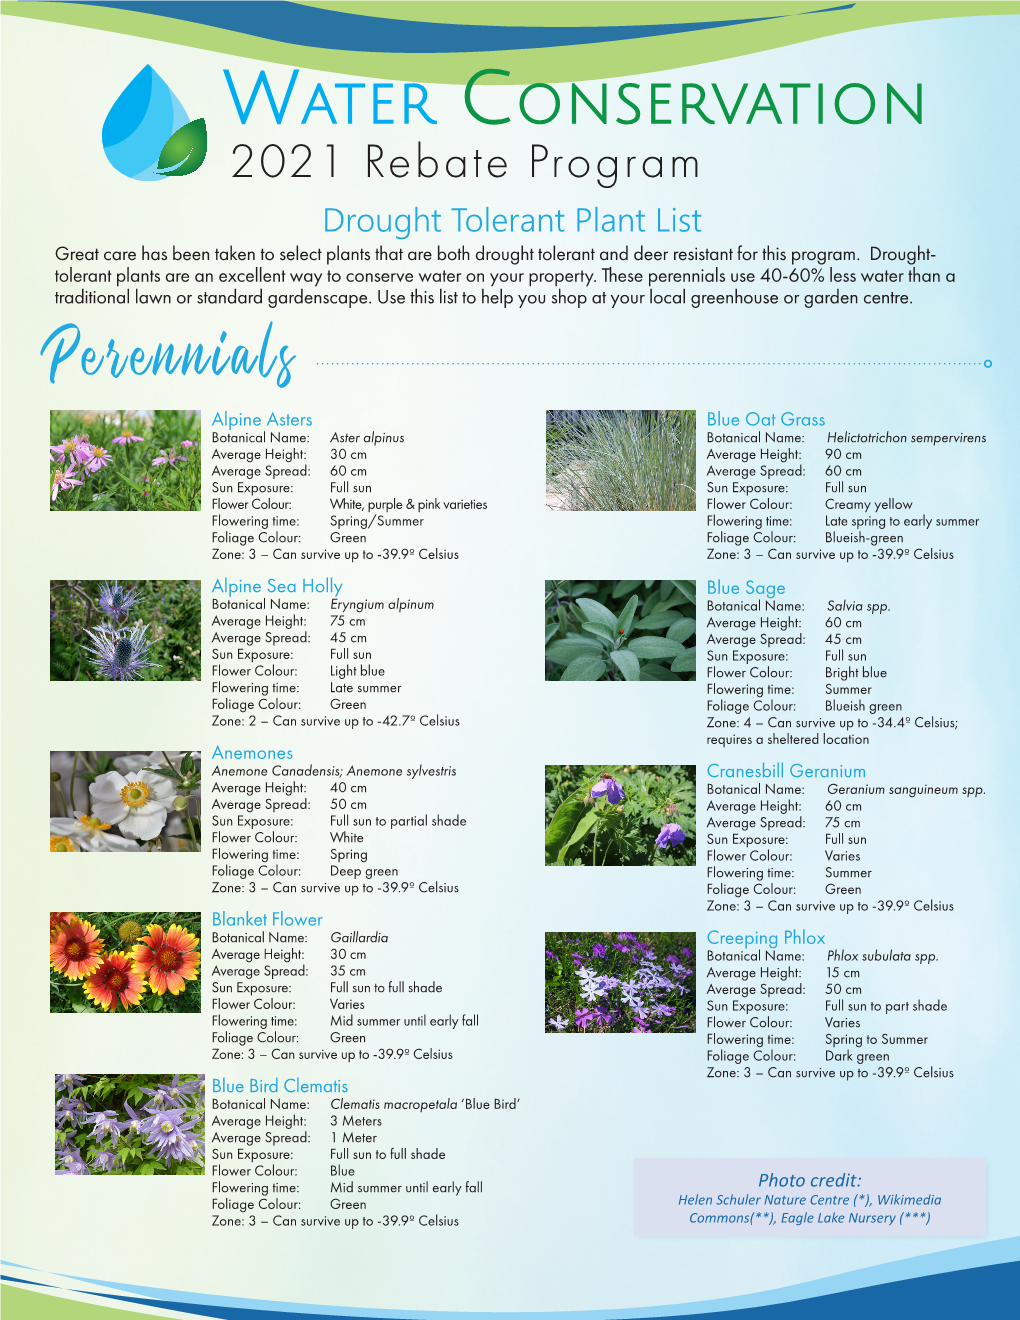 Drought Tolerant Plant List Great Care Has Been Taken to Select Plants That Are Both Drought Tolerant and Deer Resistant for This Program